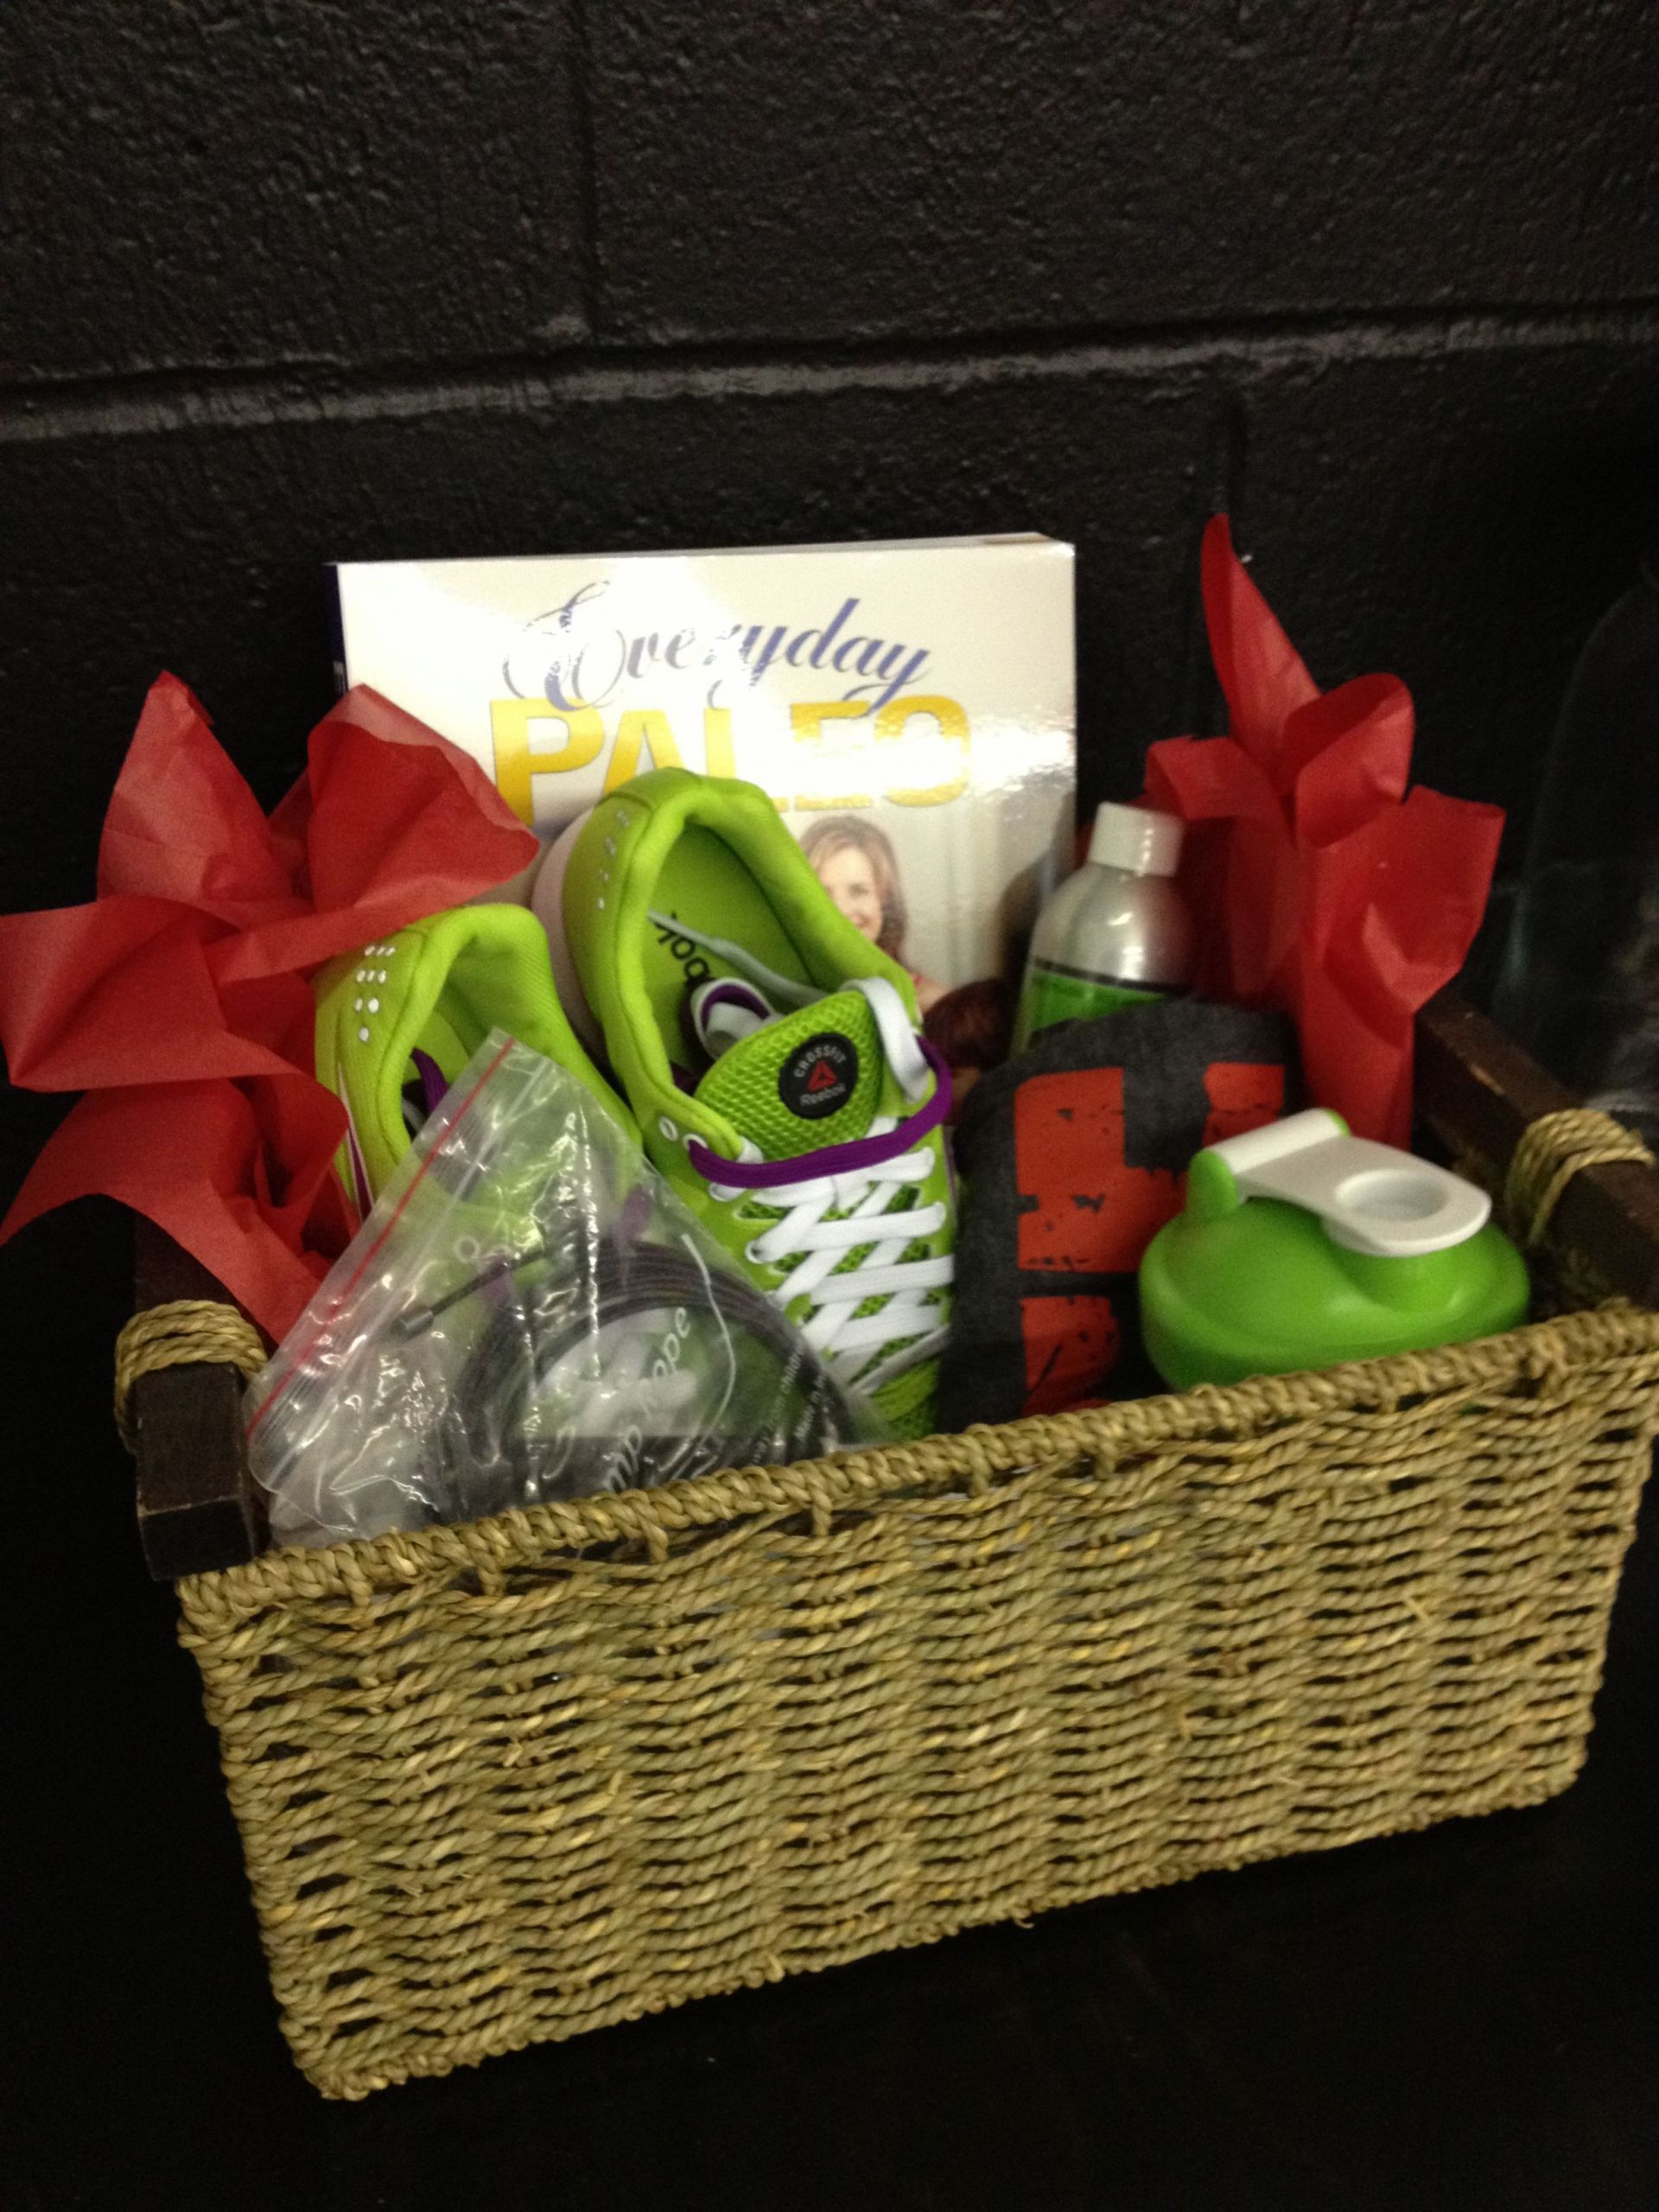 Work Gift Basket Ideas
 Pin on Gifts ideas